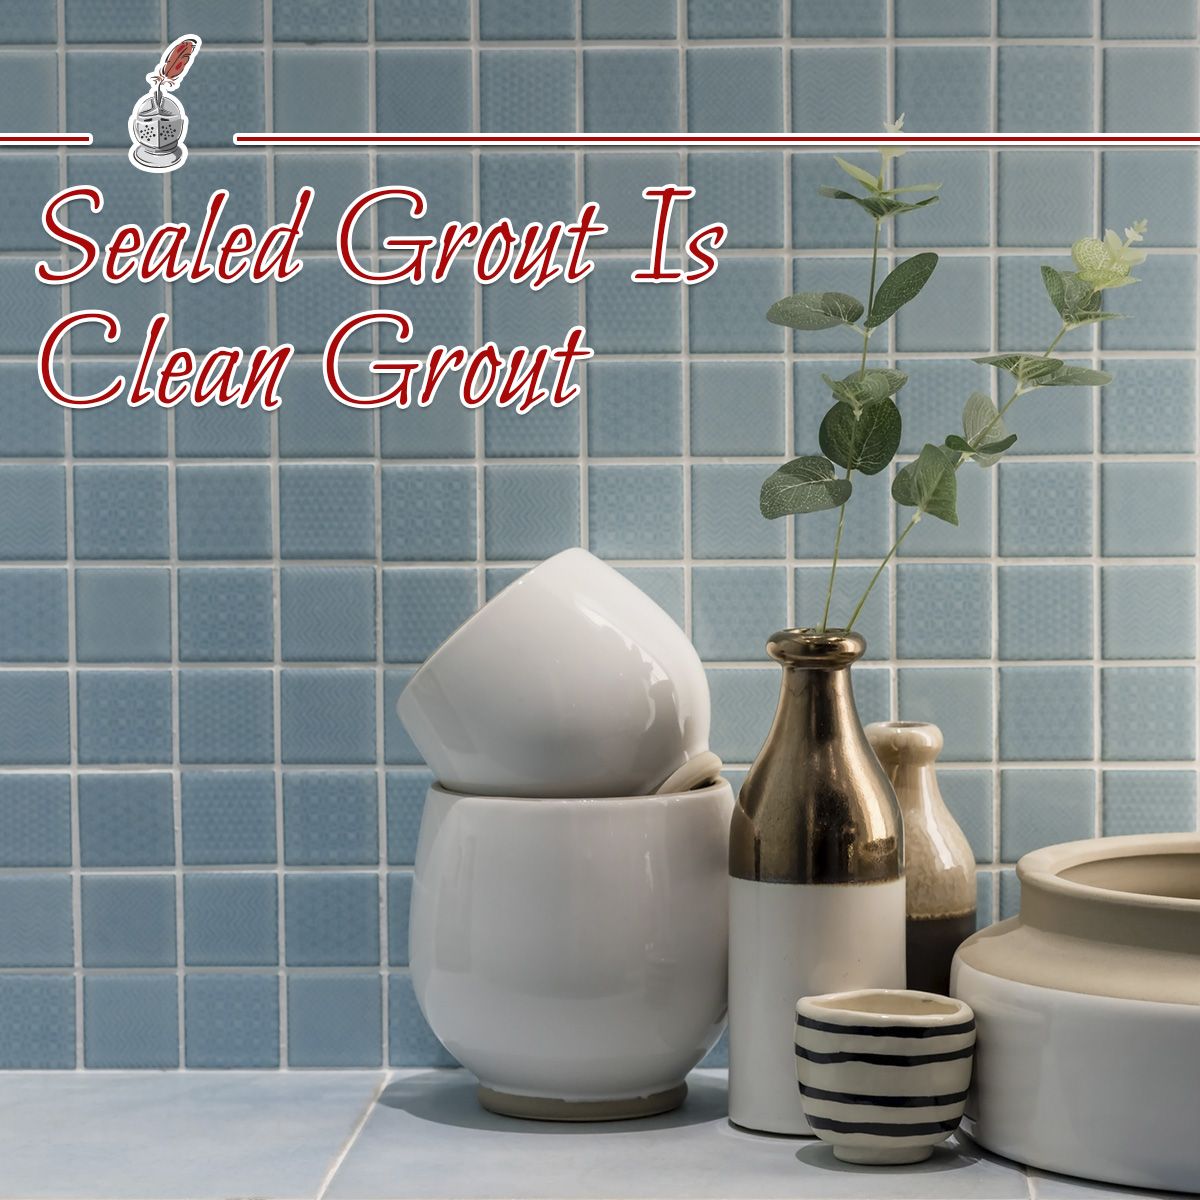 Sealed Grout Is Clean Grout